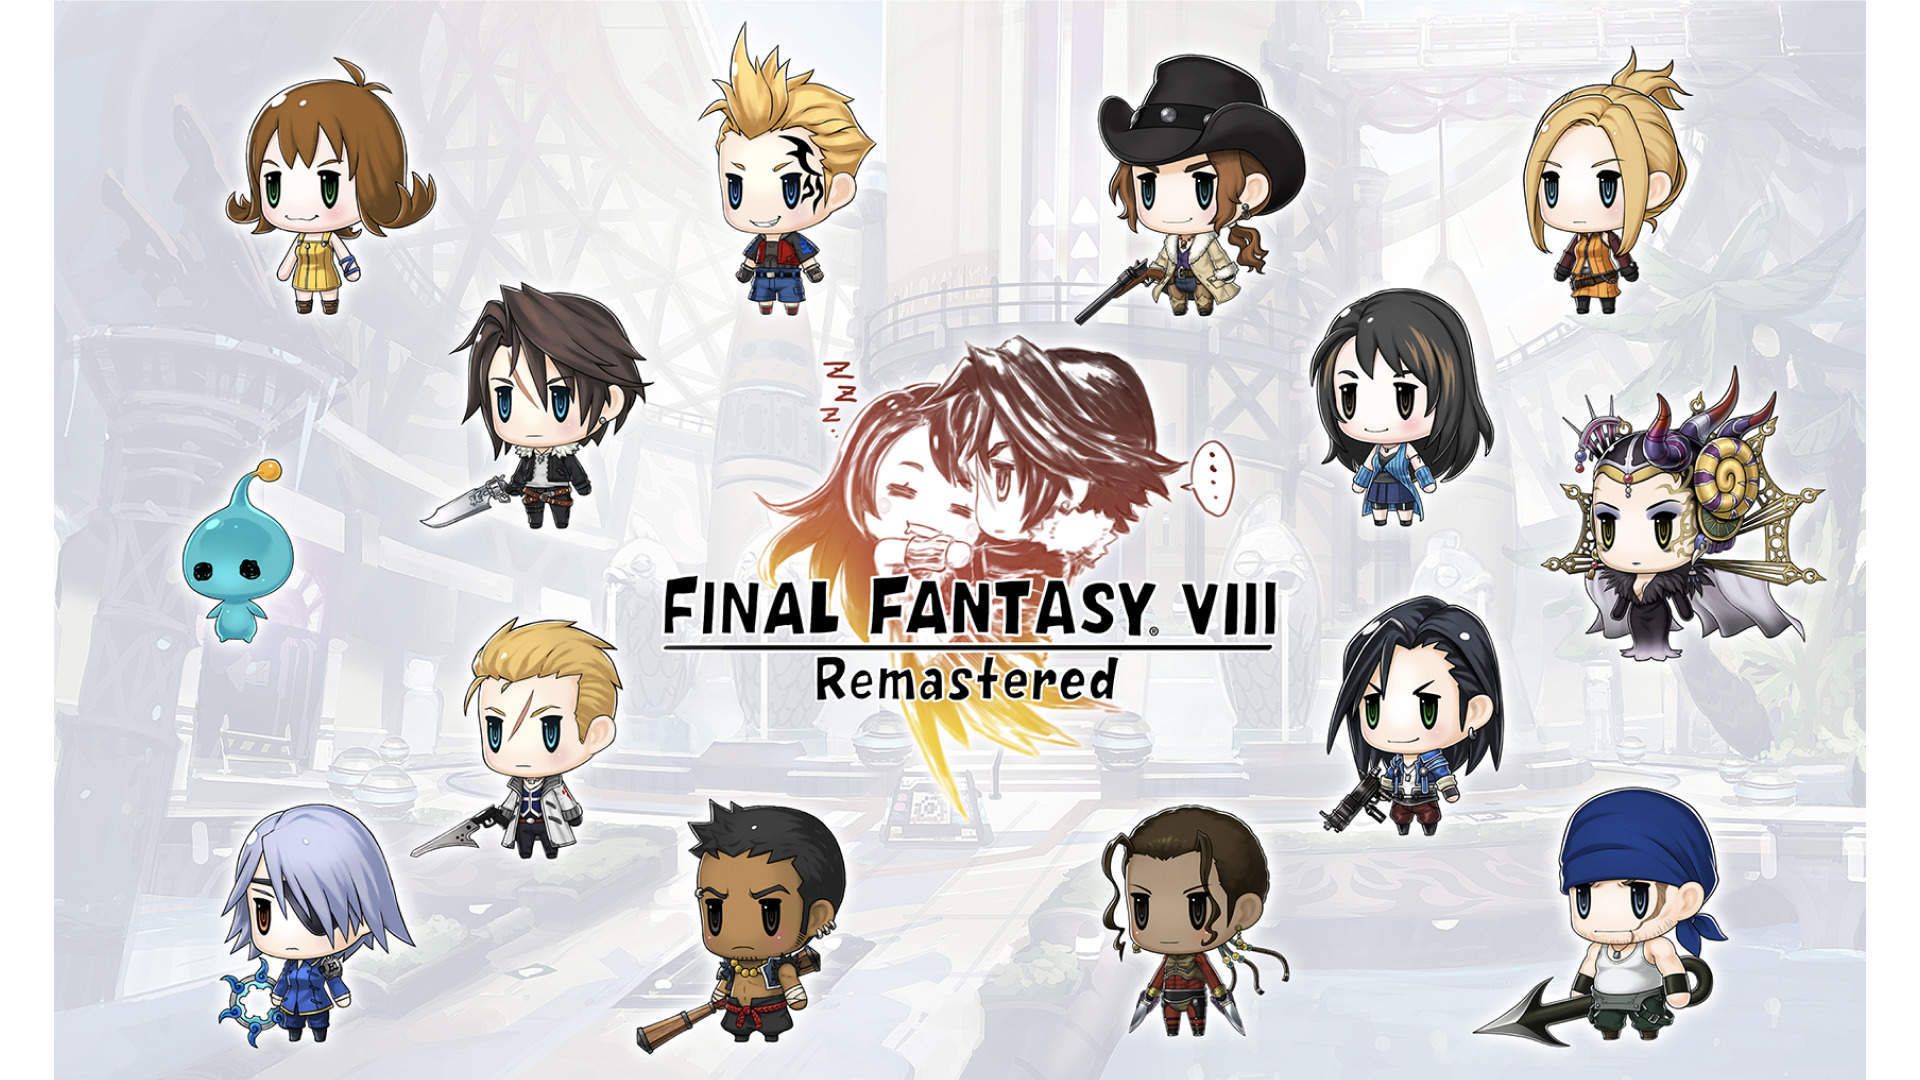 Top Square Enix artists take on FINAL FANTASY VIII Remastered